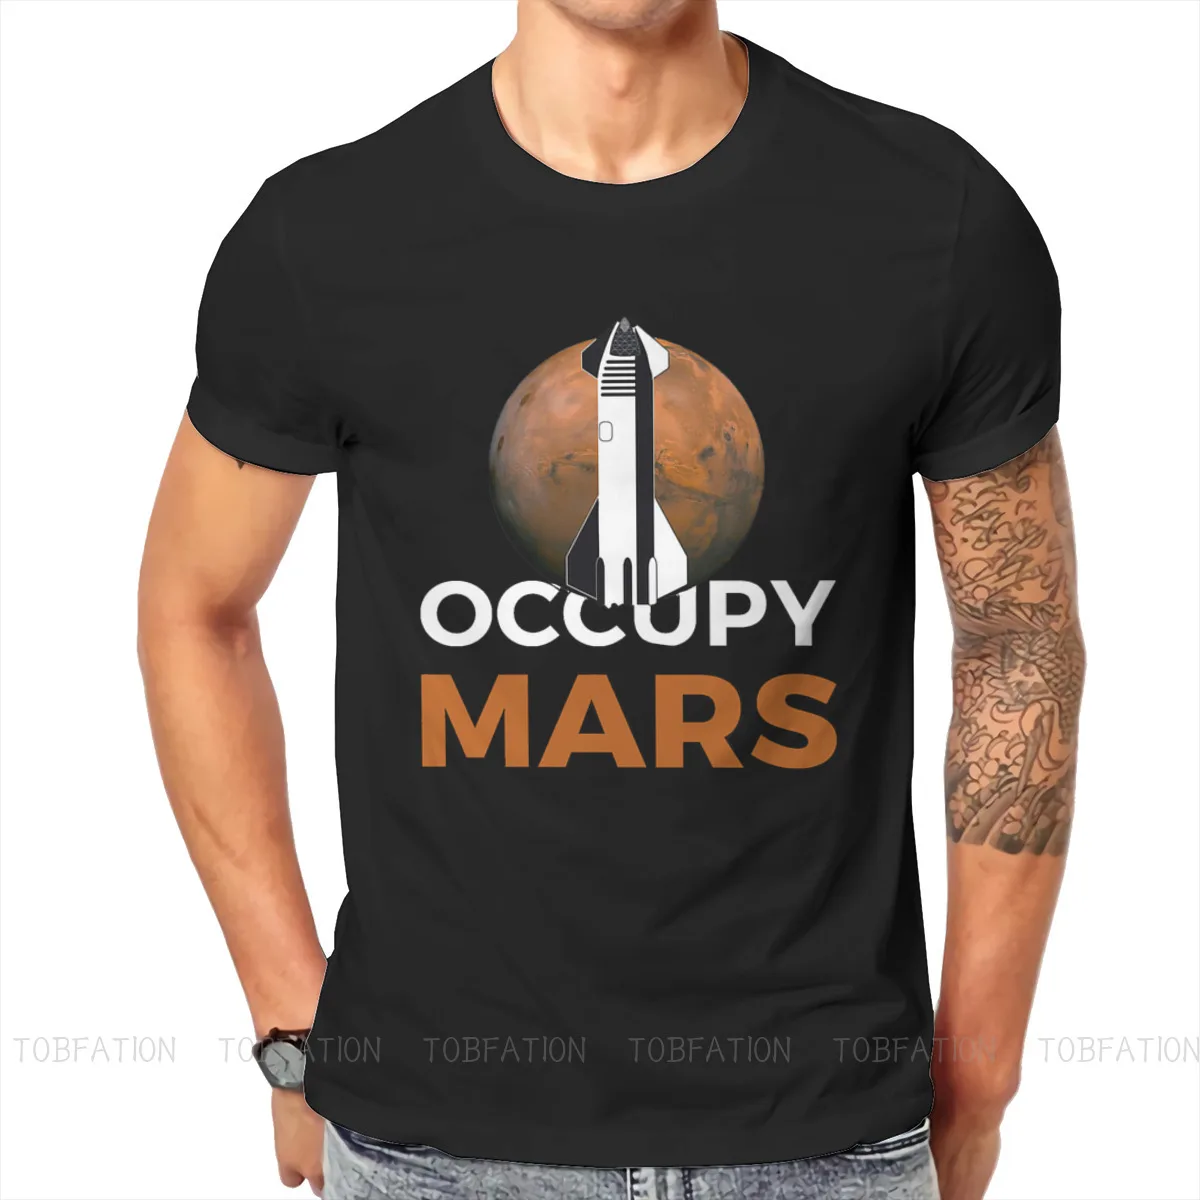 OCCUPY Spacex Starship Classic Mars 2020 Space Explorers Tshirt Top Cotton Loose O-Neck Men's Clothes Graphic Men T shirt